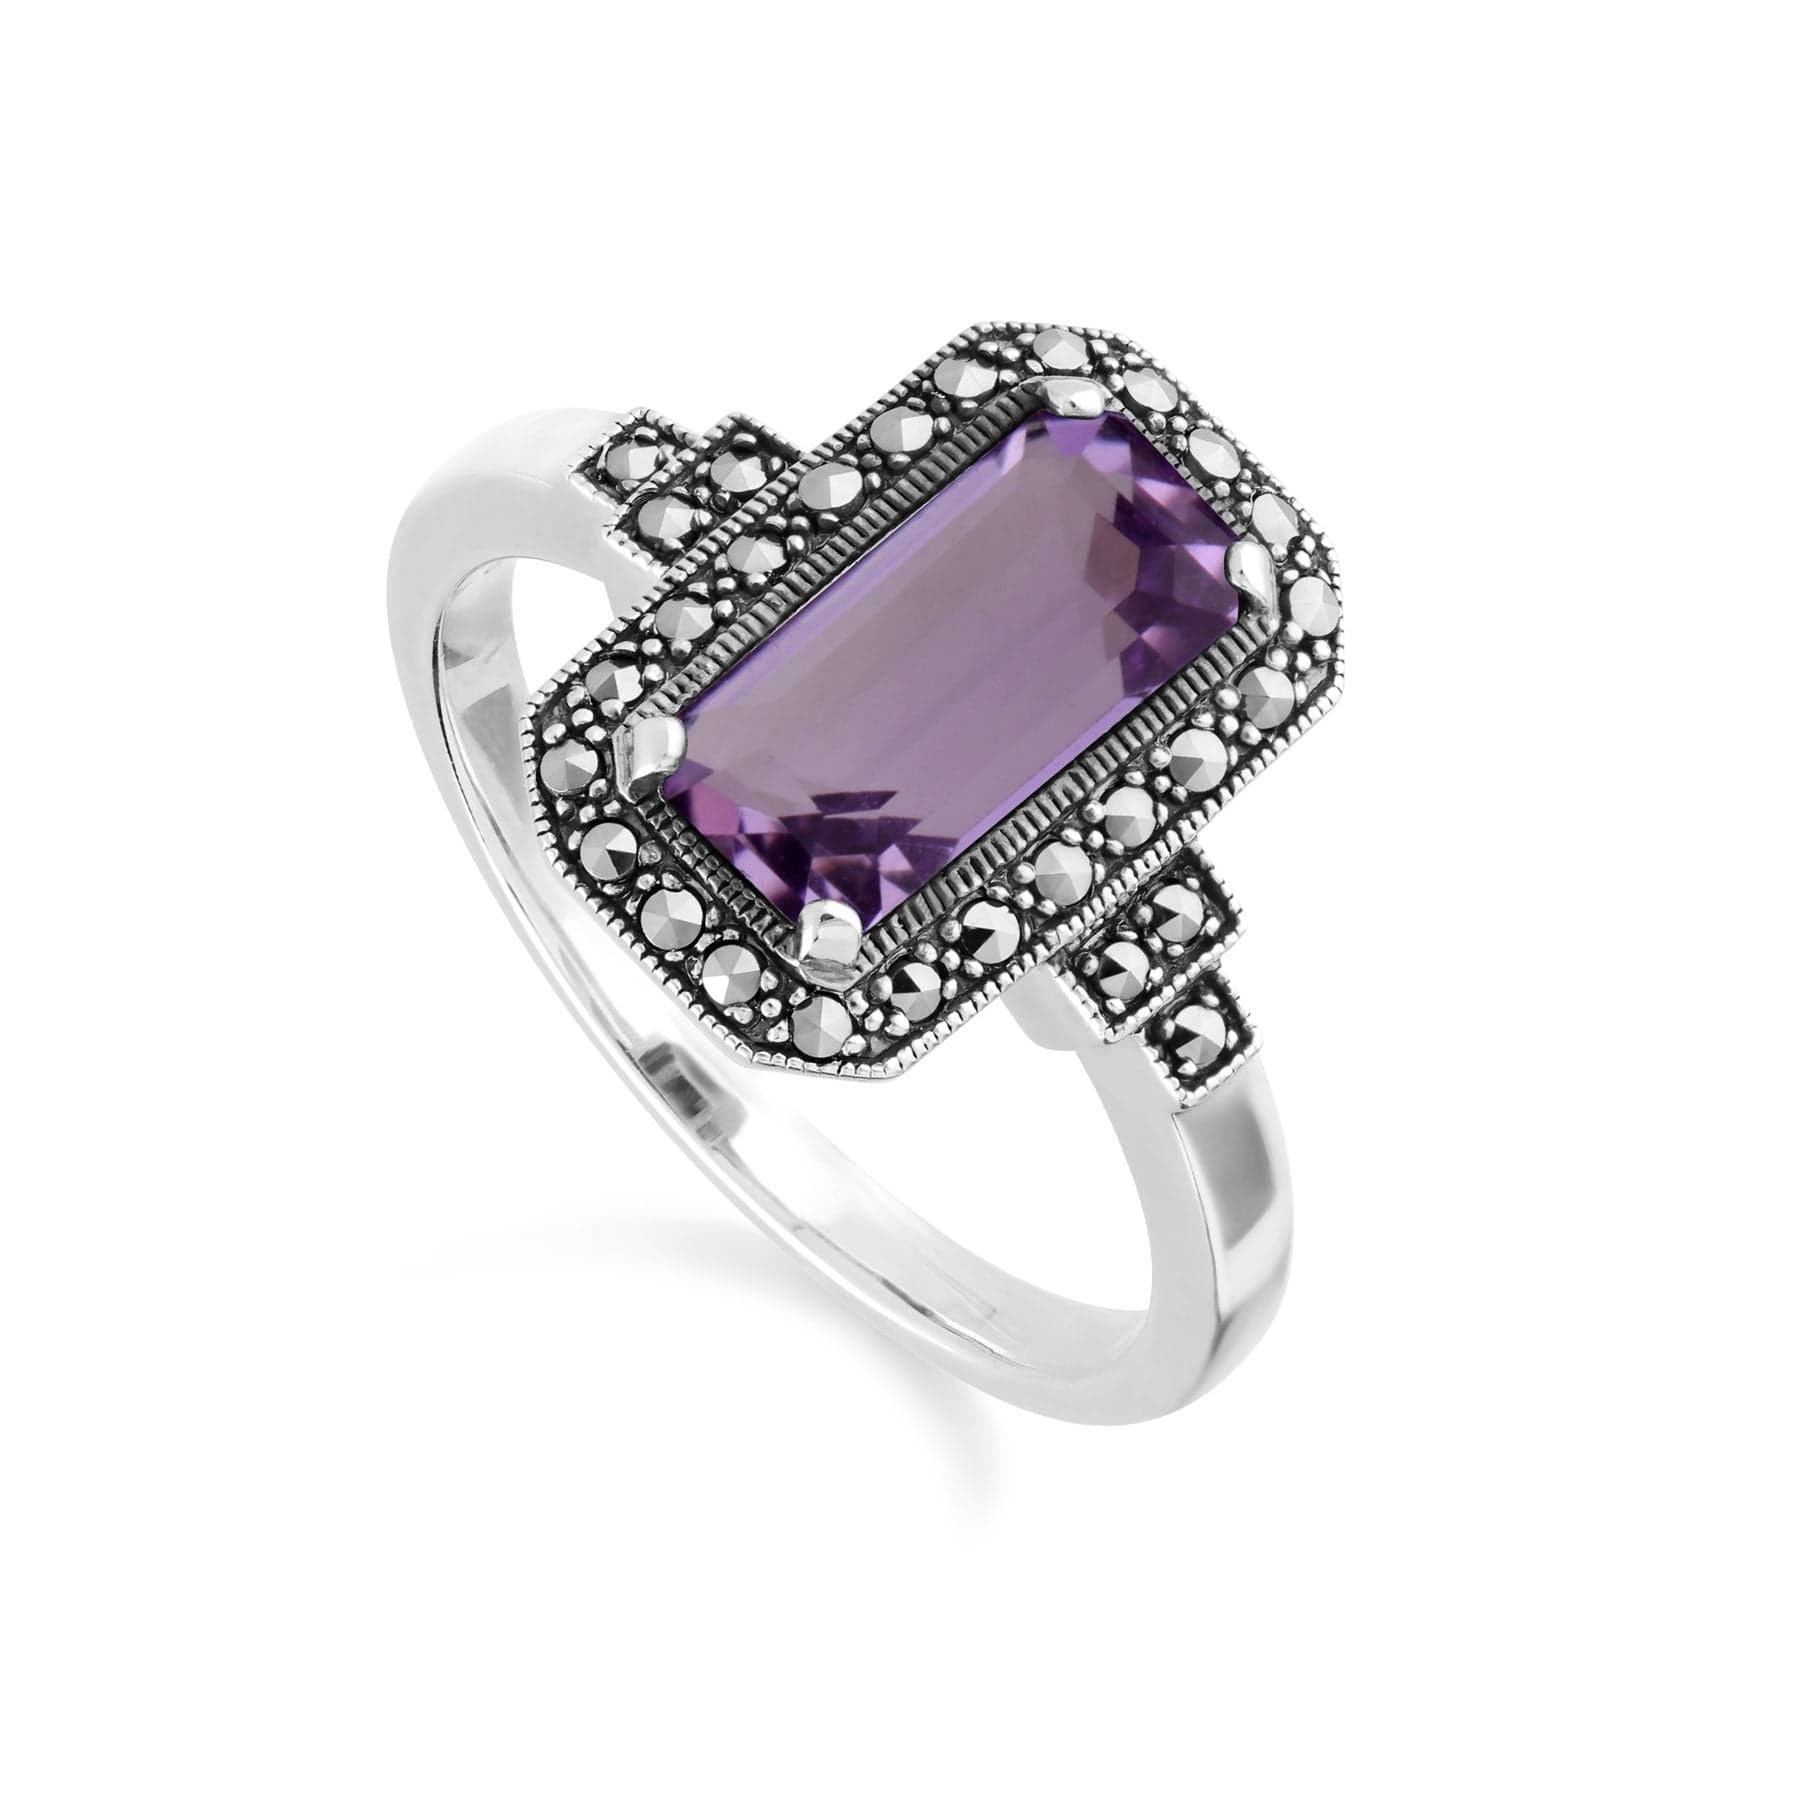 214R614703925 Art Deco Inspired Octagon Cut Amethyst & Marcasite Ring In Sterling Silver 1